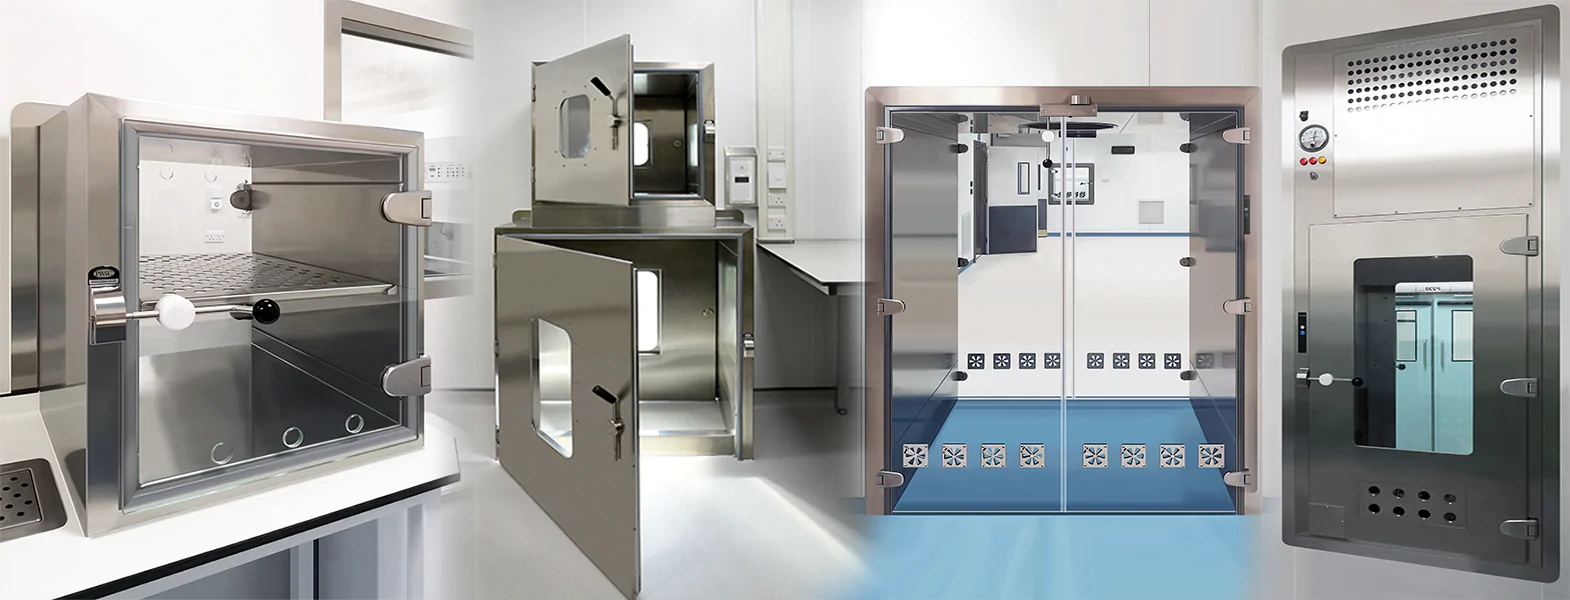 Our hatches which are among the best on the market, also known as a pass box, pass chamber, or pass through, help reduce the risk of physical movement or transfer of harmful bacteria and pressure loss when transferring equipment between different classification areas within cleanrooms or controlled environments.